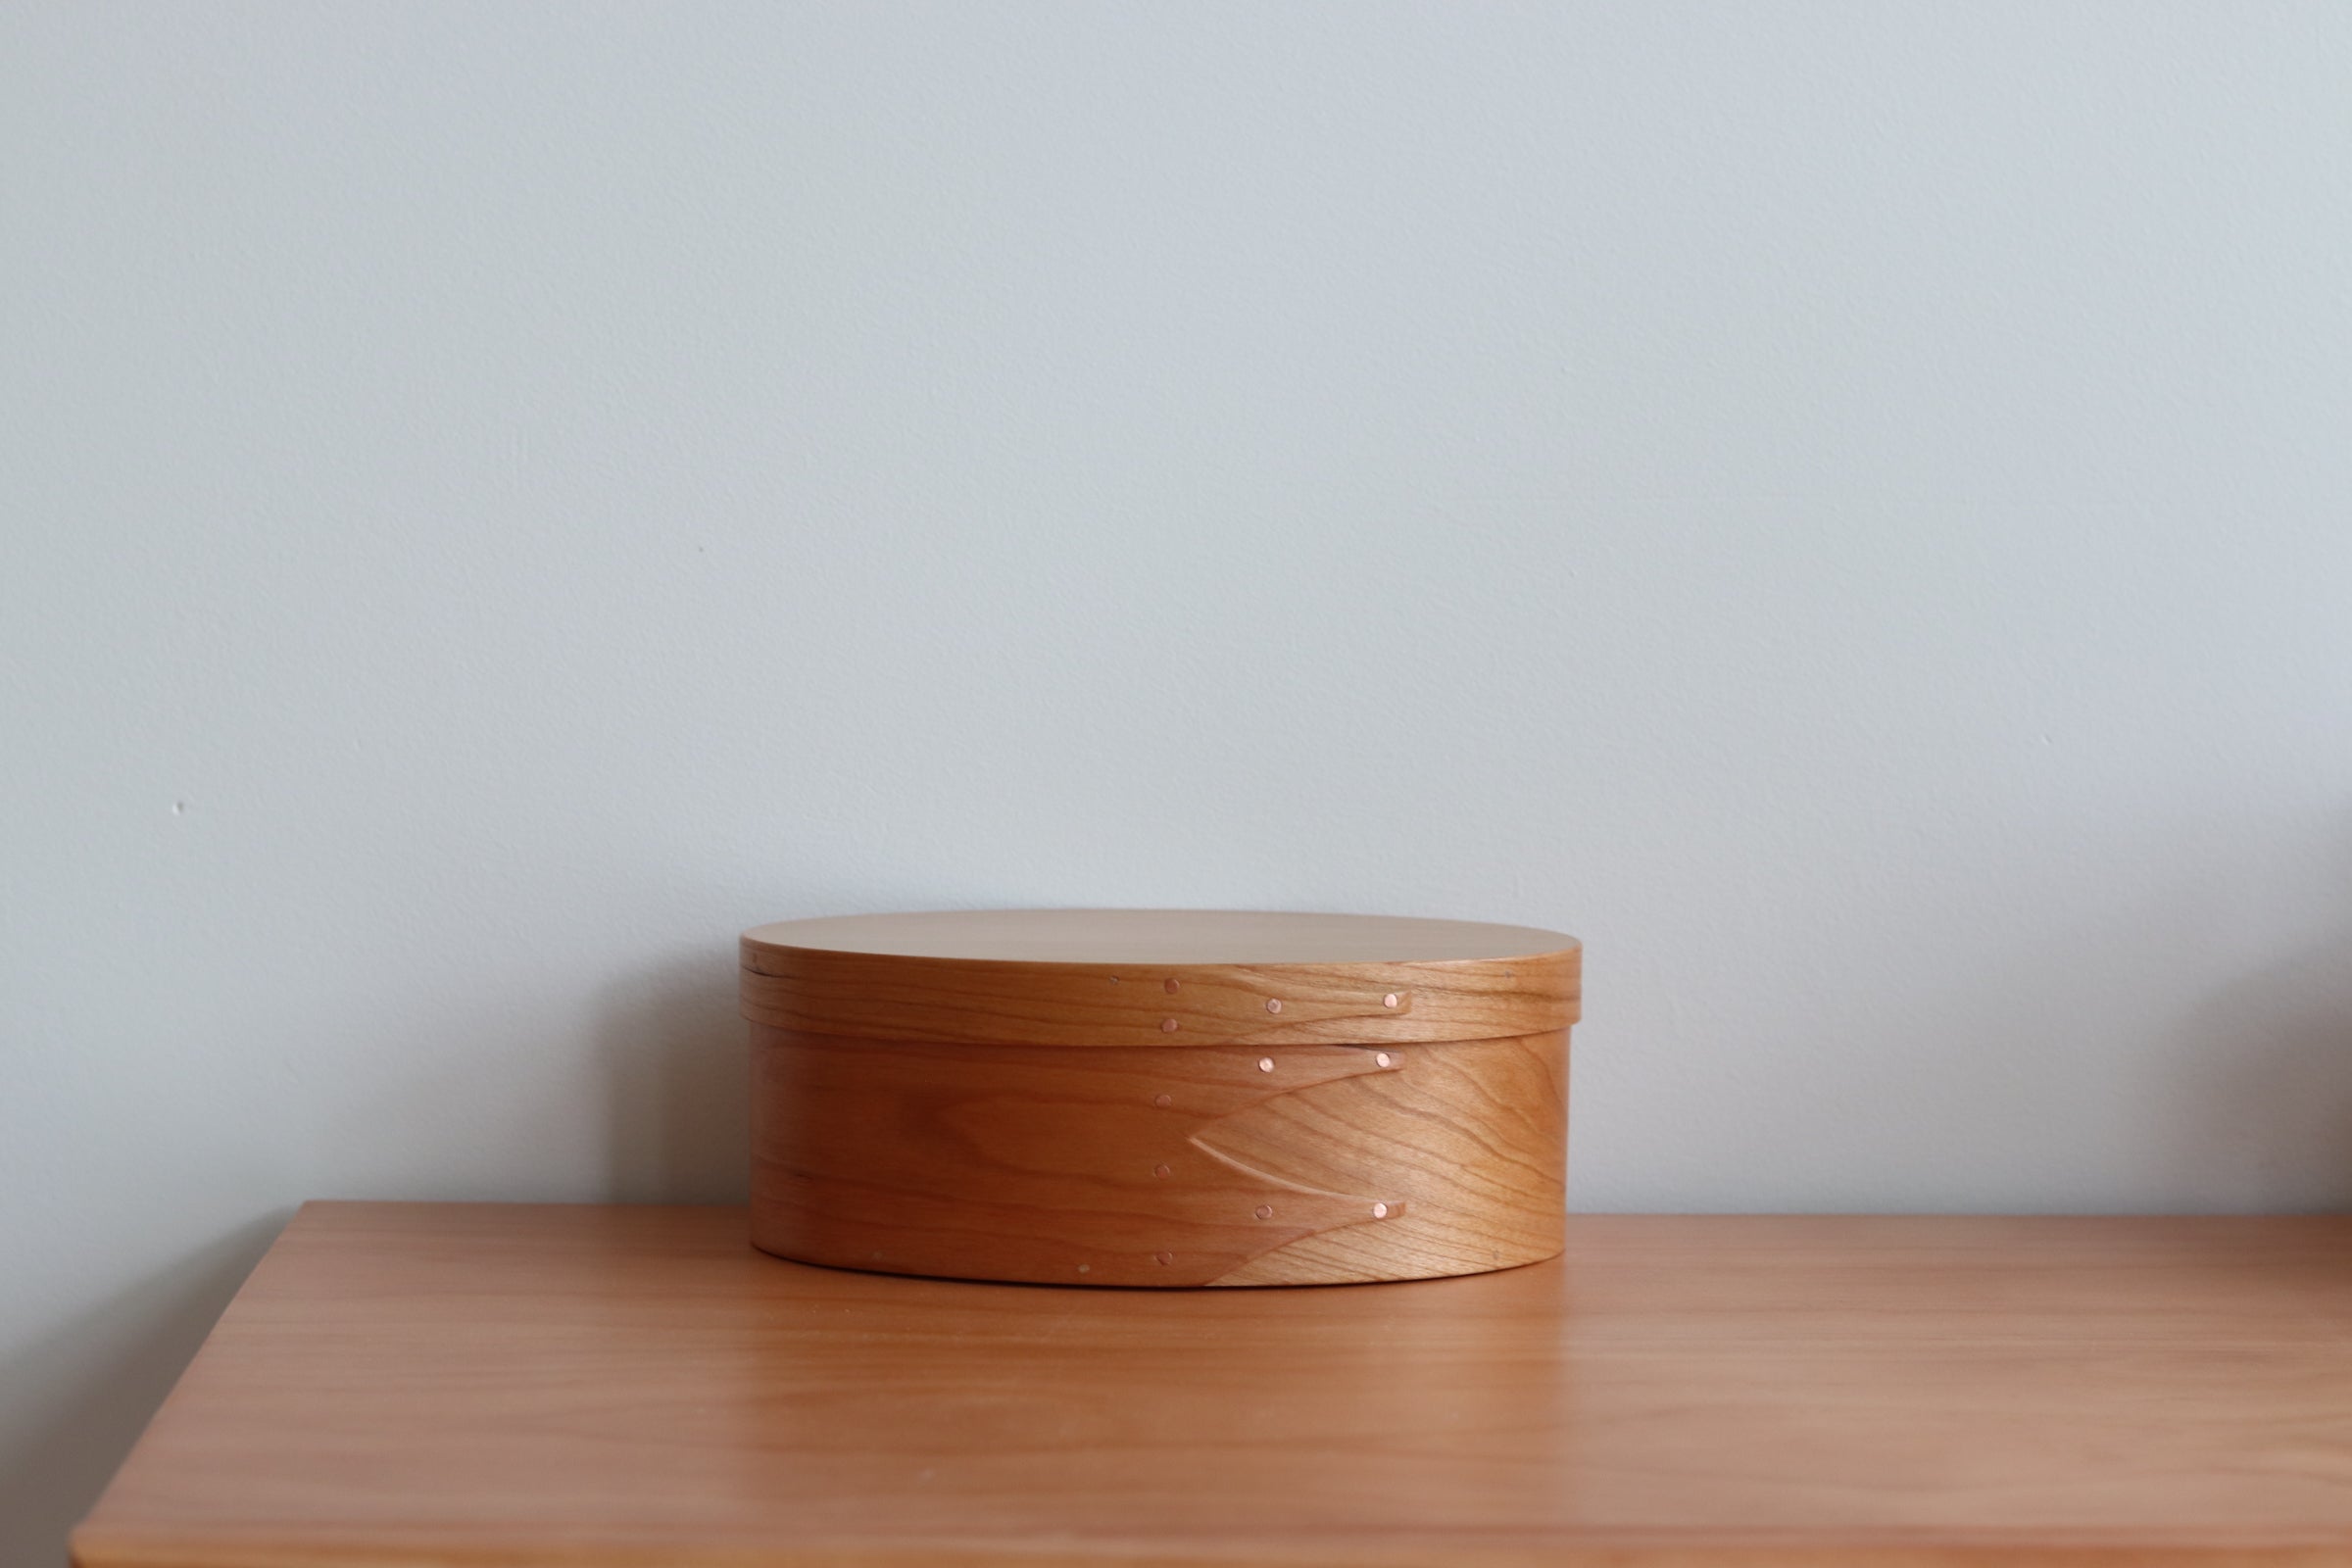 Traditional Shaker Boxes - Cherry Wood